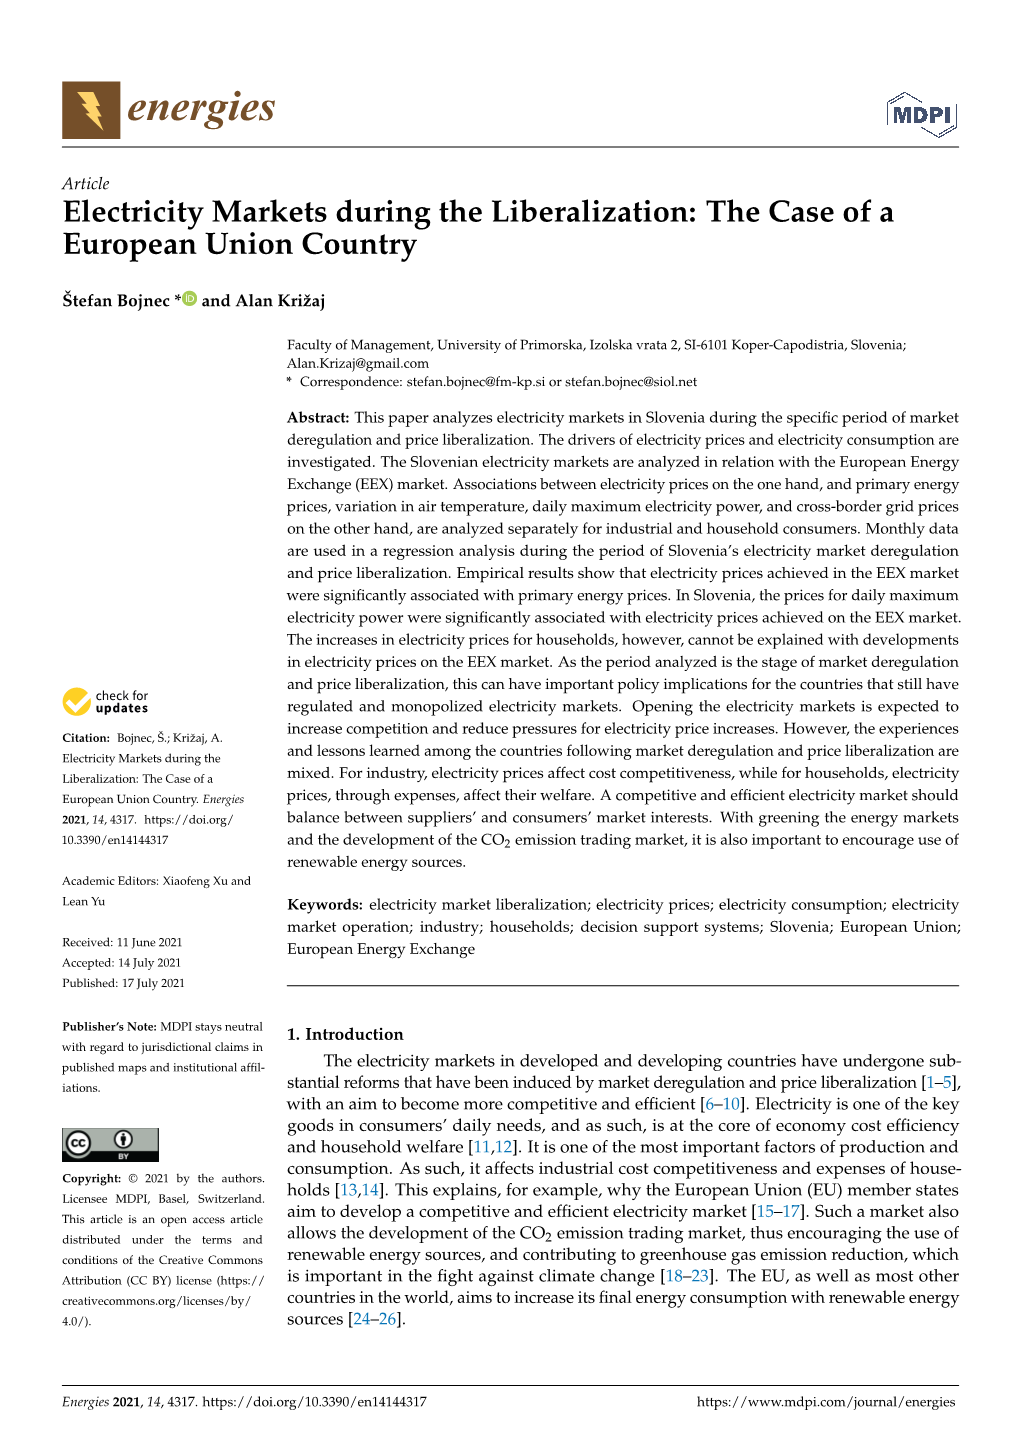 Electricity Markets During the Liberalization: the Case of a European Union Country